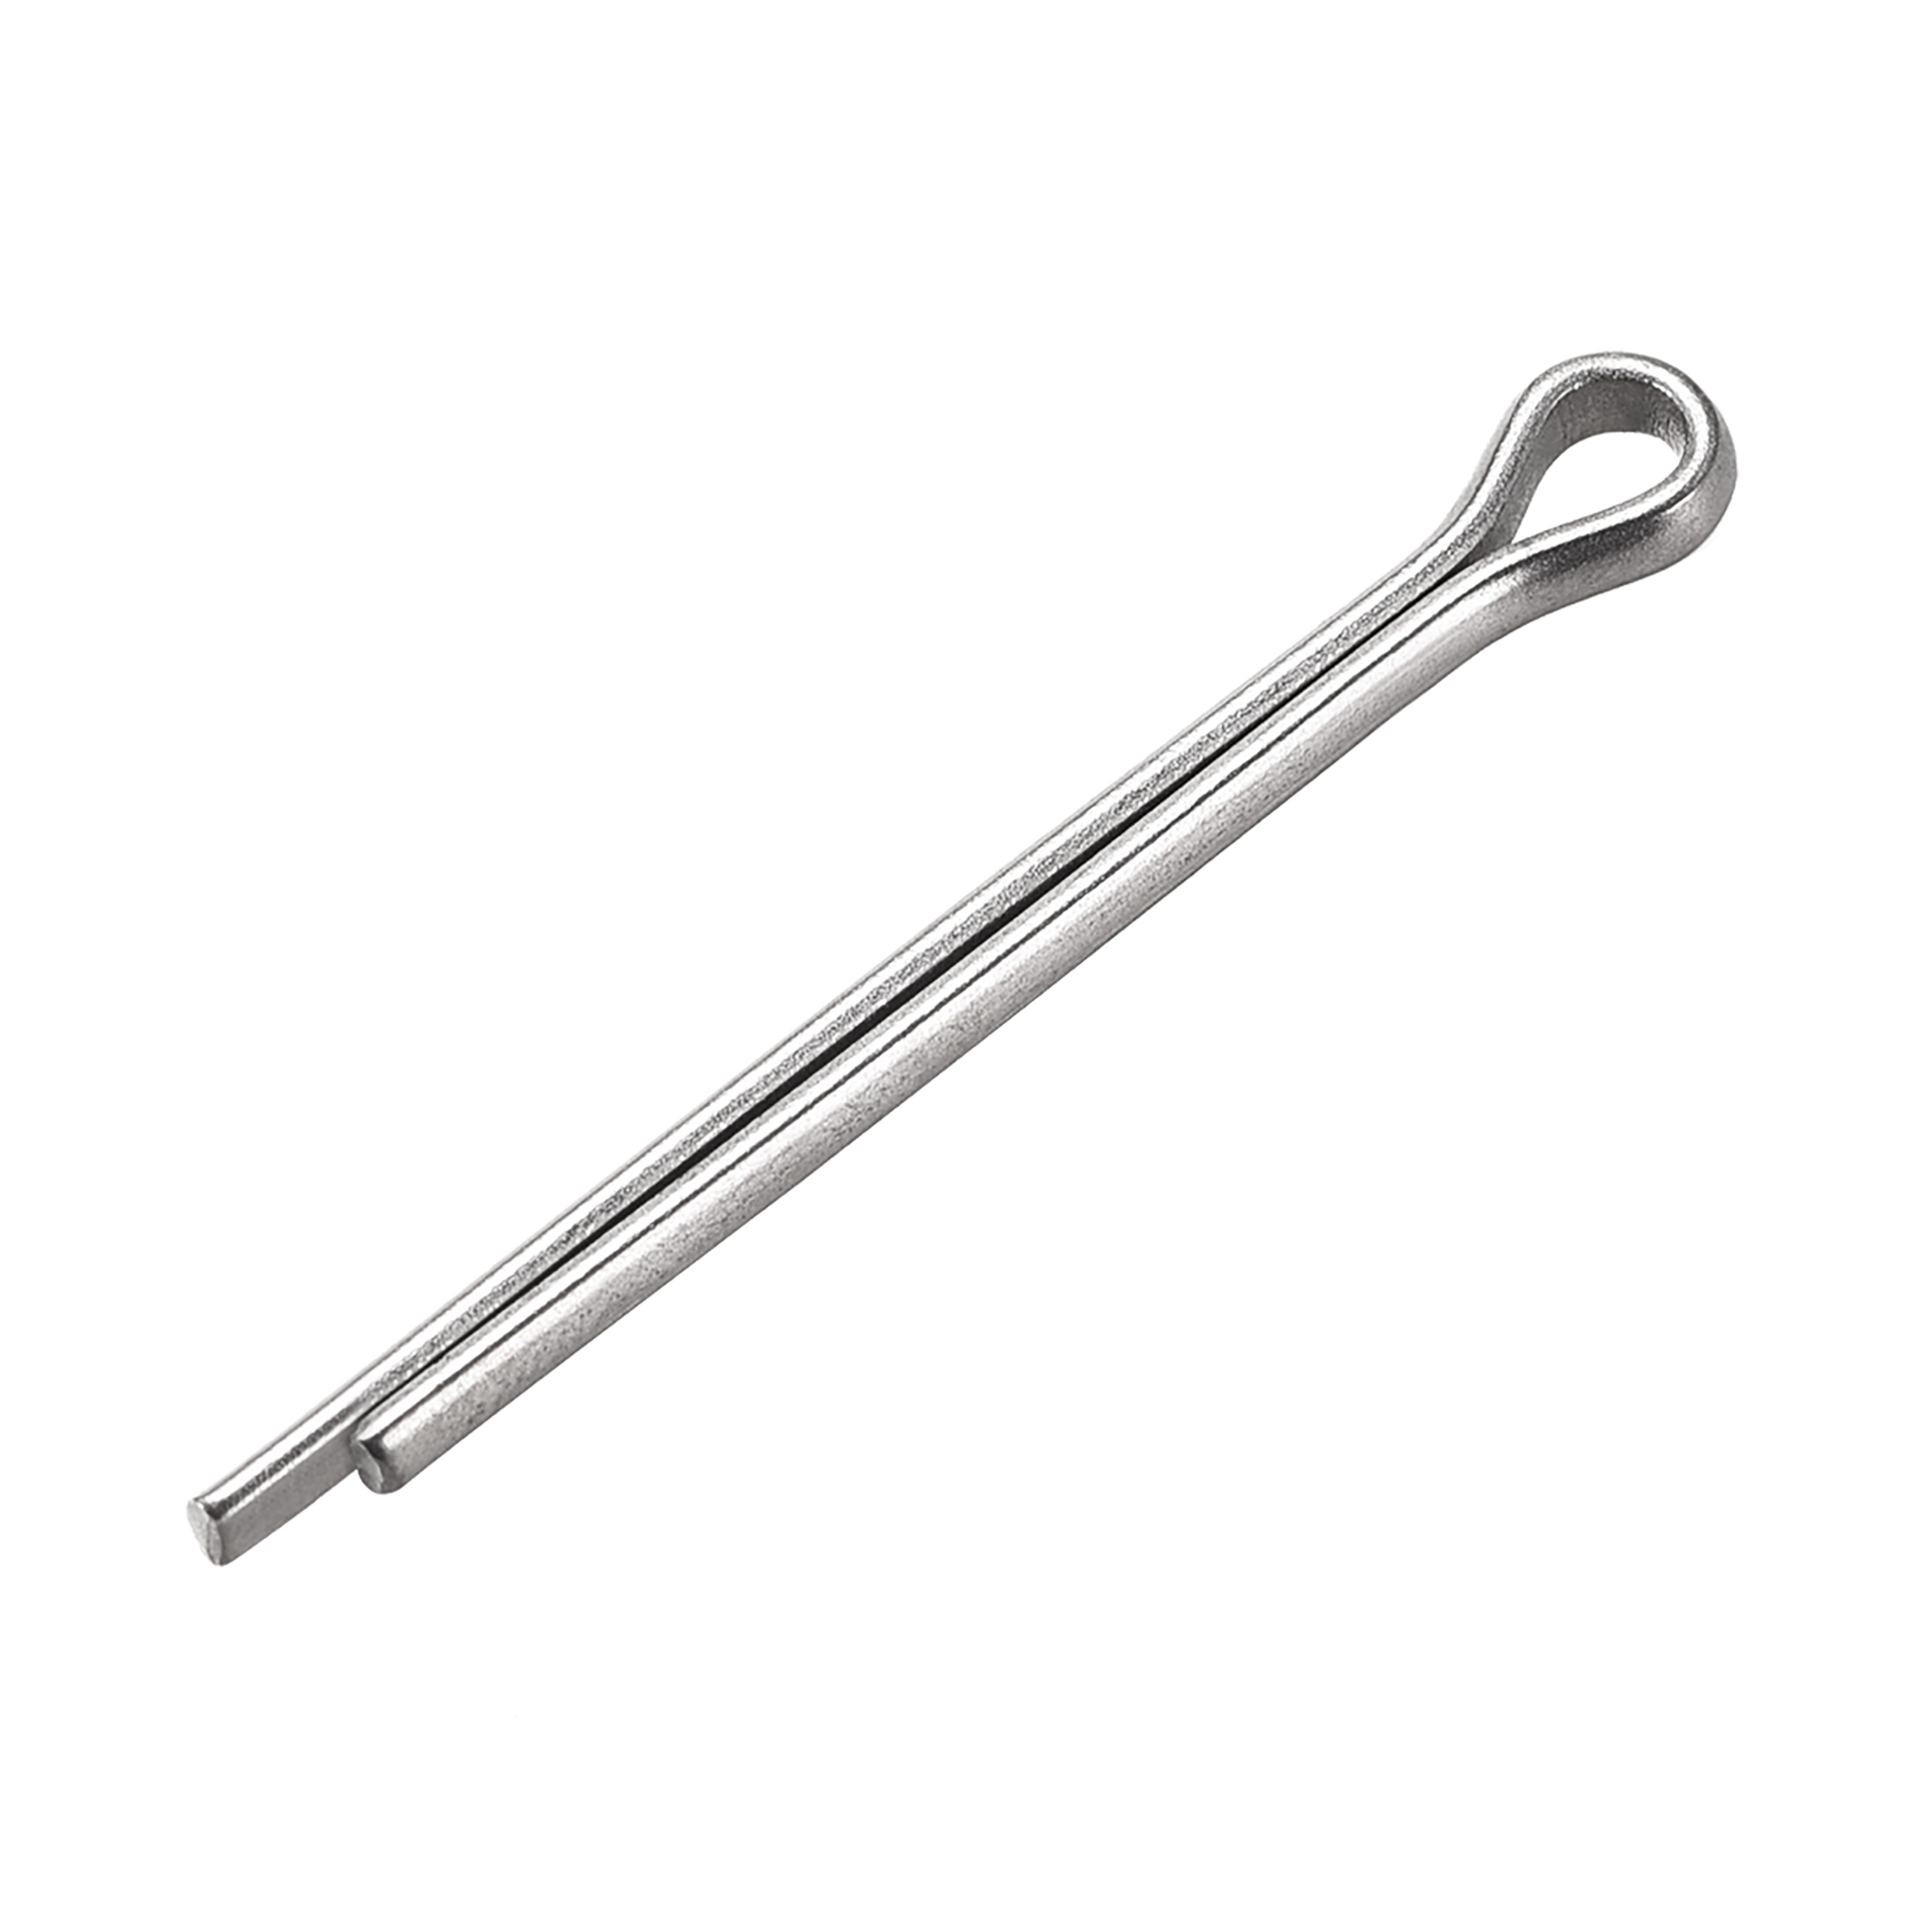 Split Cotter Pin 3mm X 35mm 304 Stainless Steel 2 Prongs Silver Tone 30pcs 